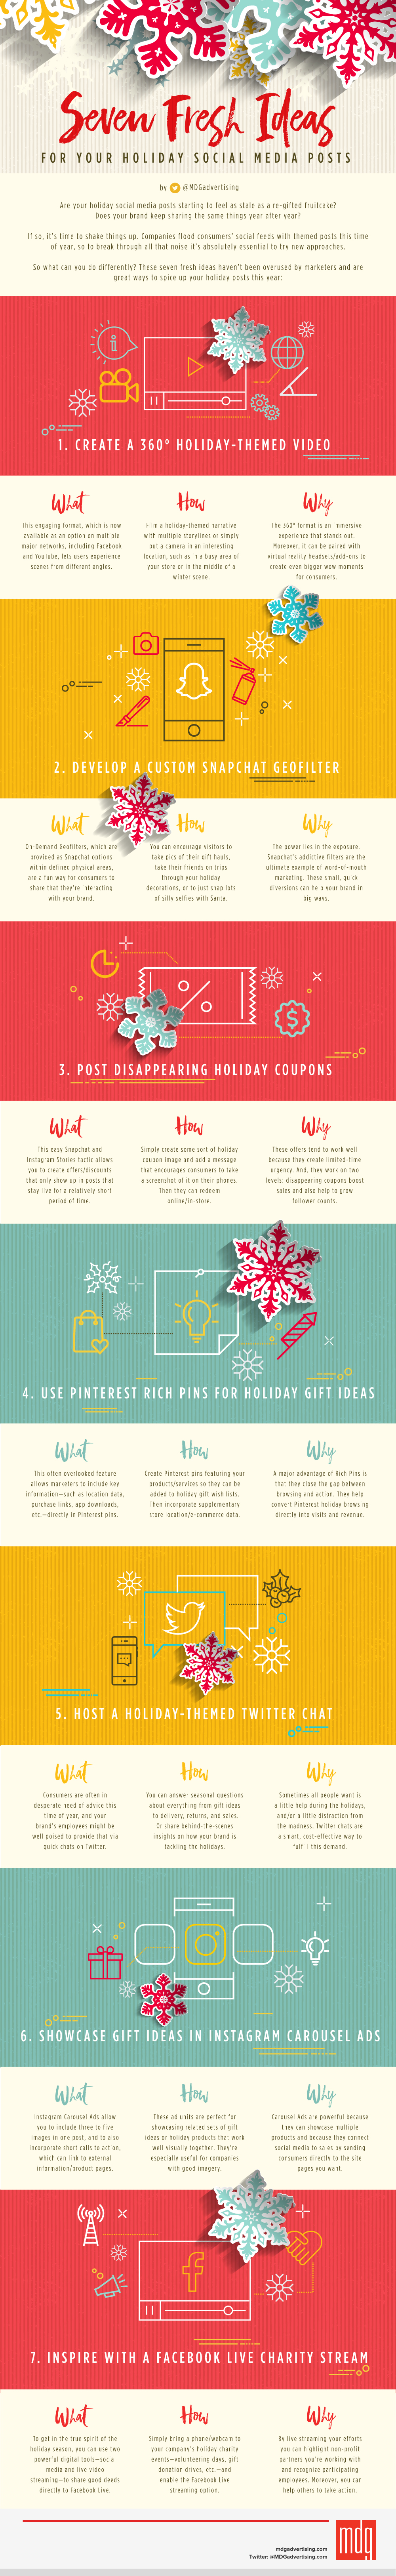 mdg-45265-1000x6504-holiday-infographic-social-media-infographic